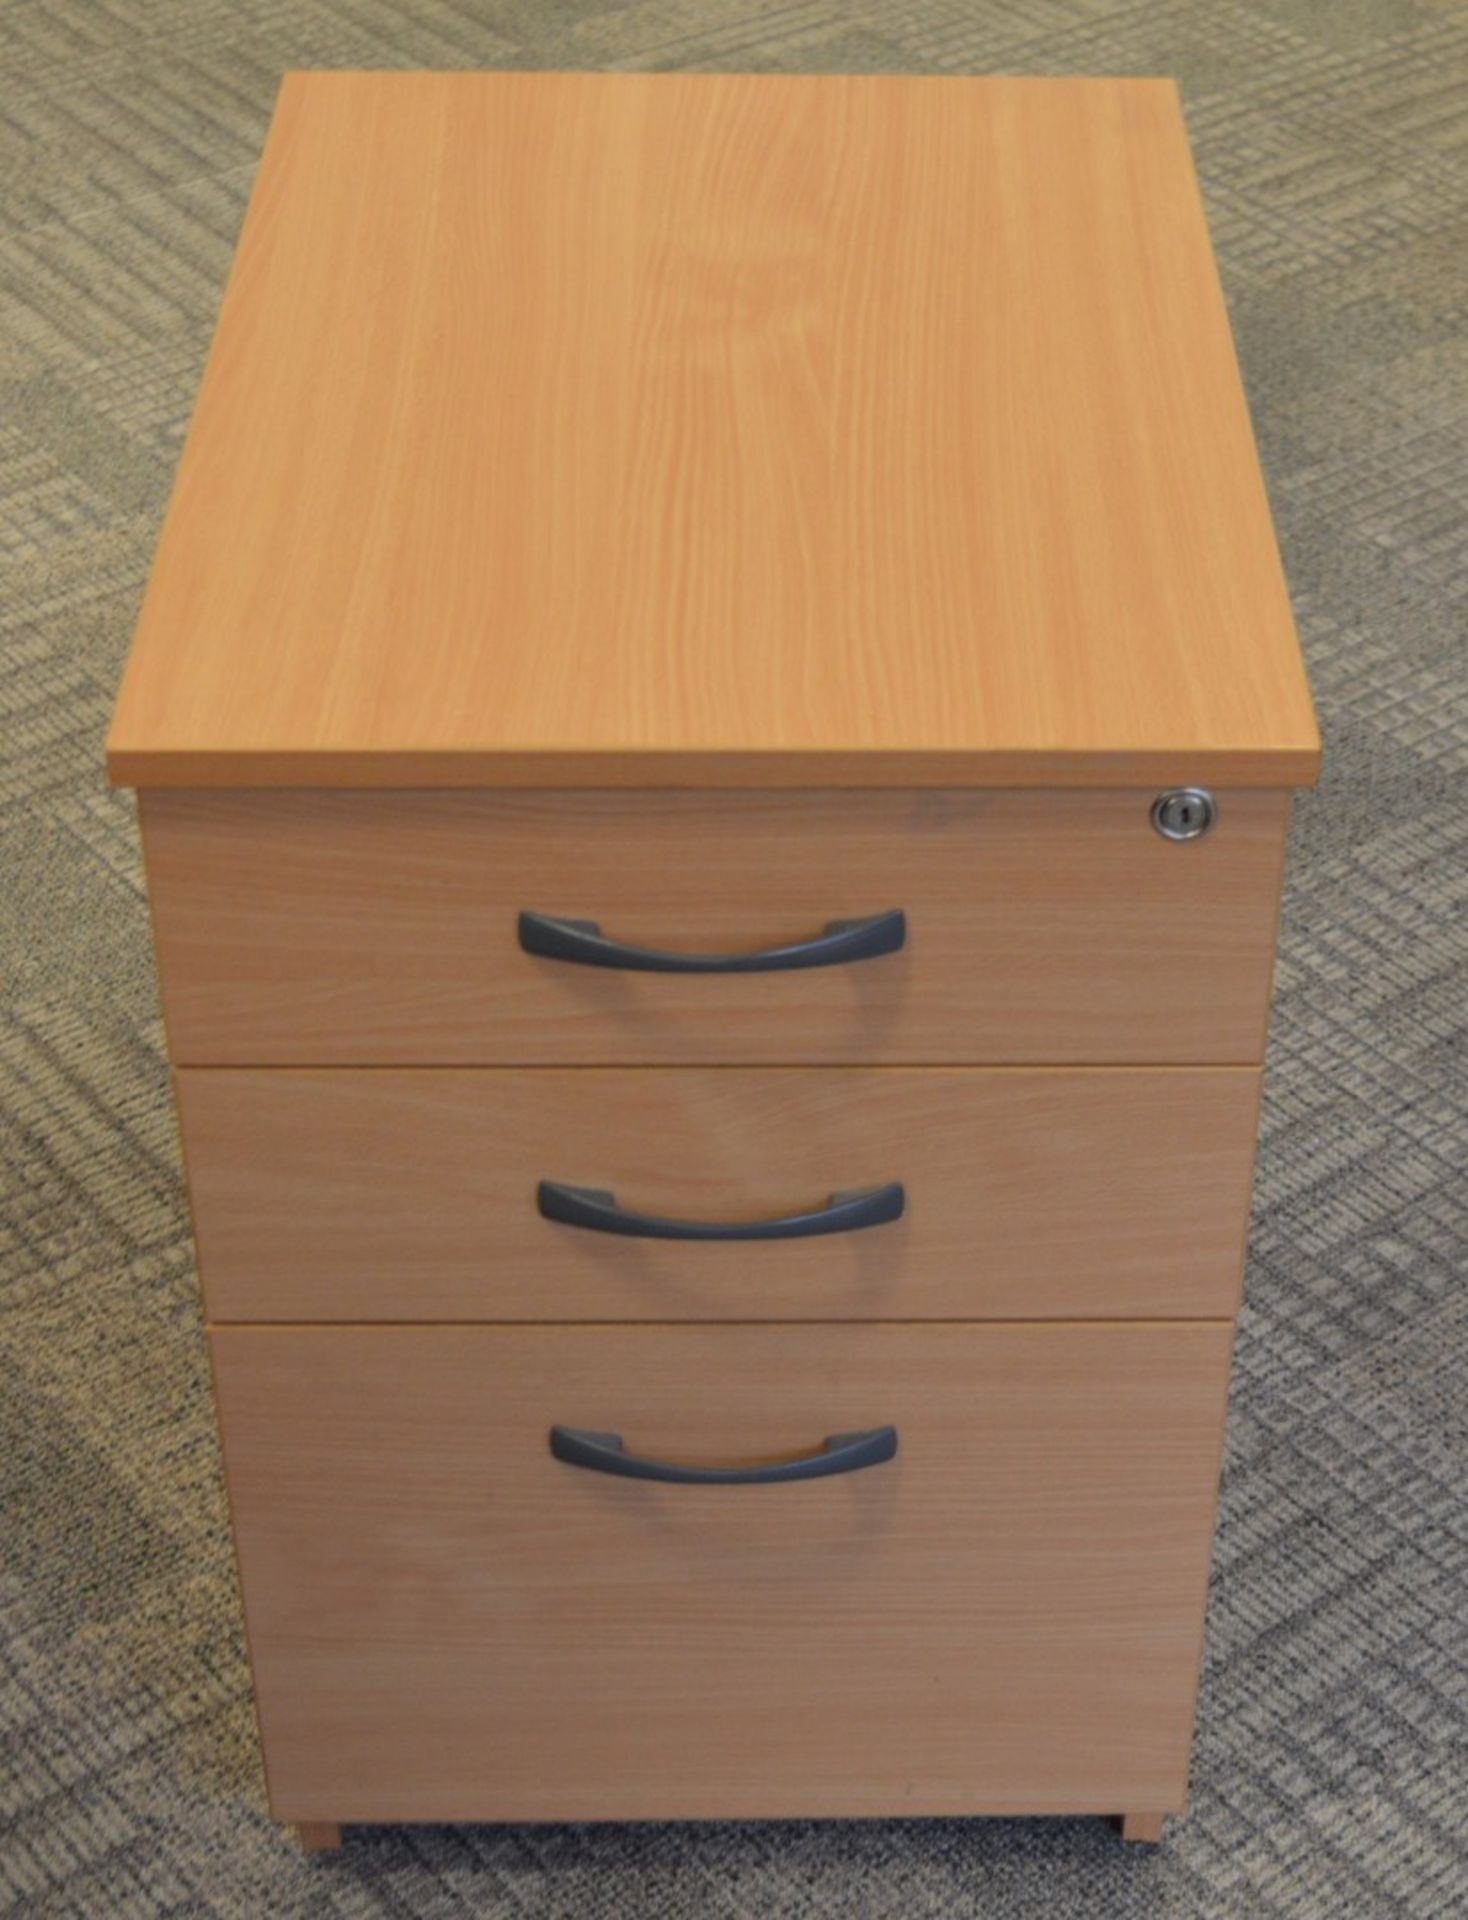 1 x Three Drawer Mobile Pedestal Drawers - With Key - Modern Beech Finish - Two Storage Drawers - Image 5 of 7